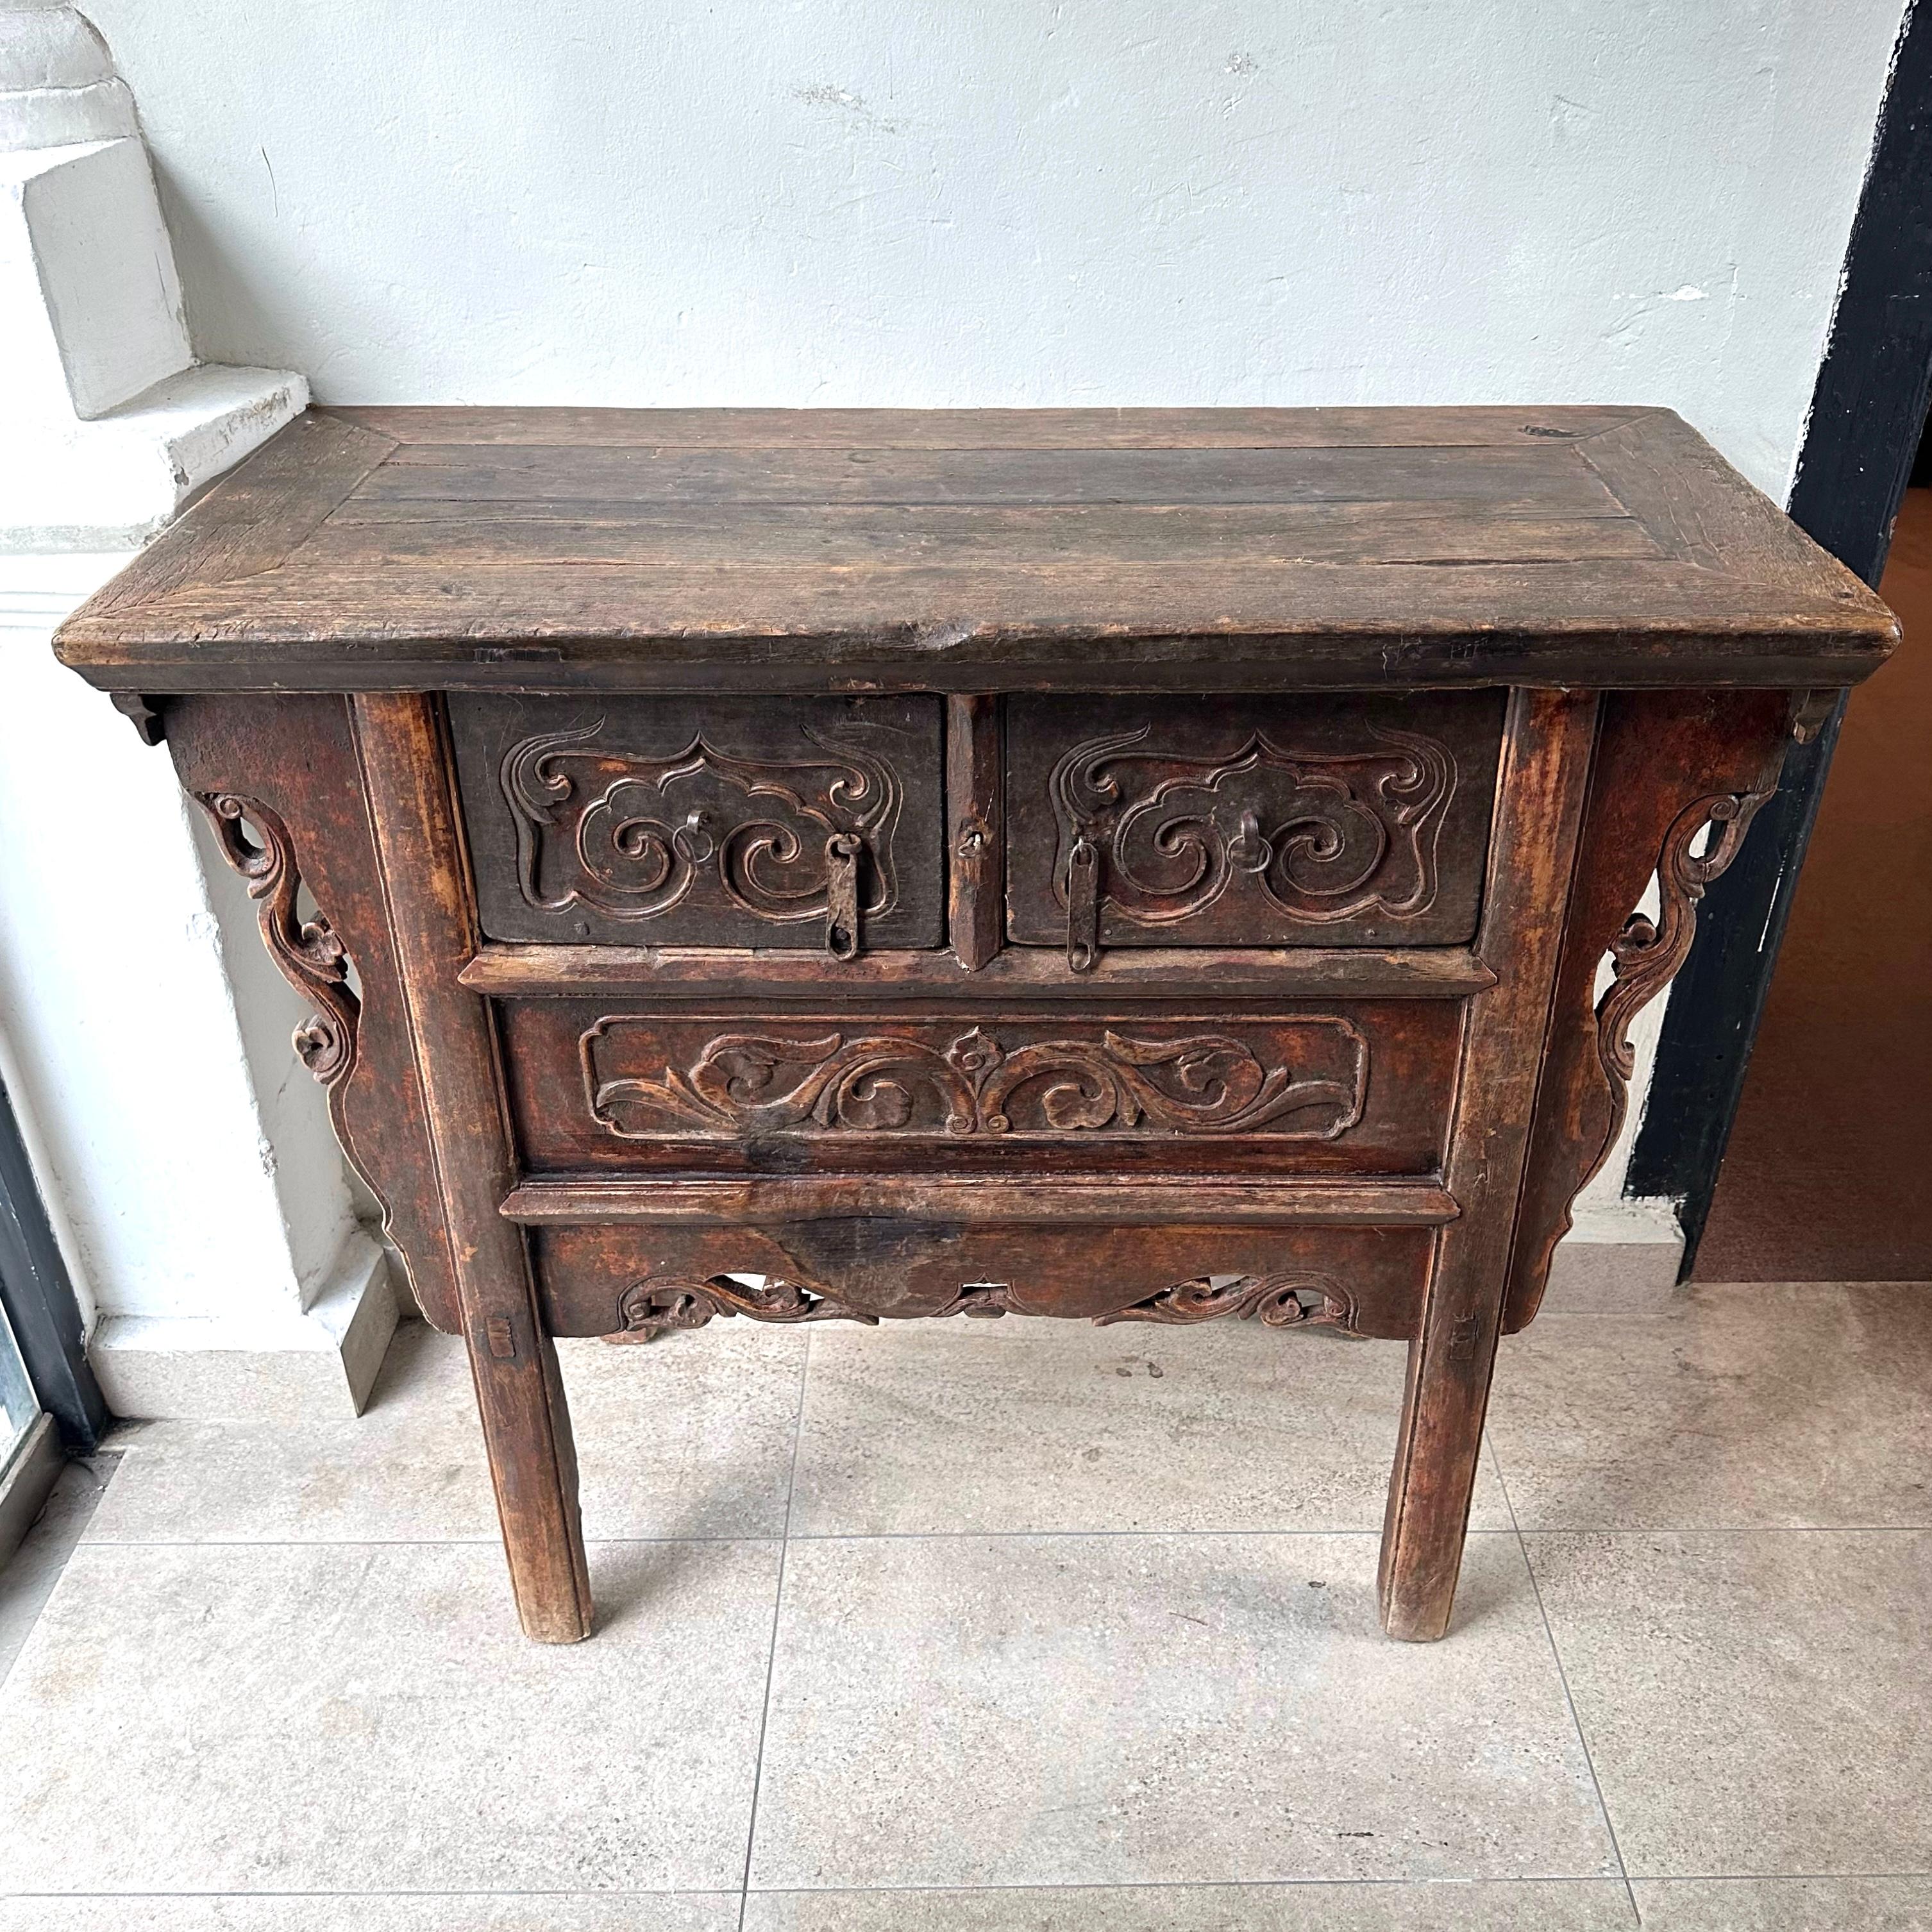 A late 19th century antique coffer table from Shanxi province, China, with excellent patina and beautiful original colour which we had left untouched. The two drawers have relief carvings of cloud motifs, and they pull out completely to reveal a